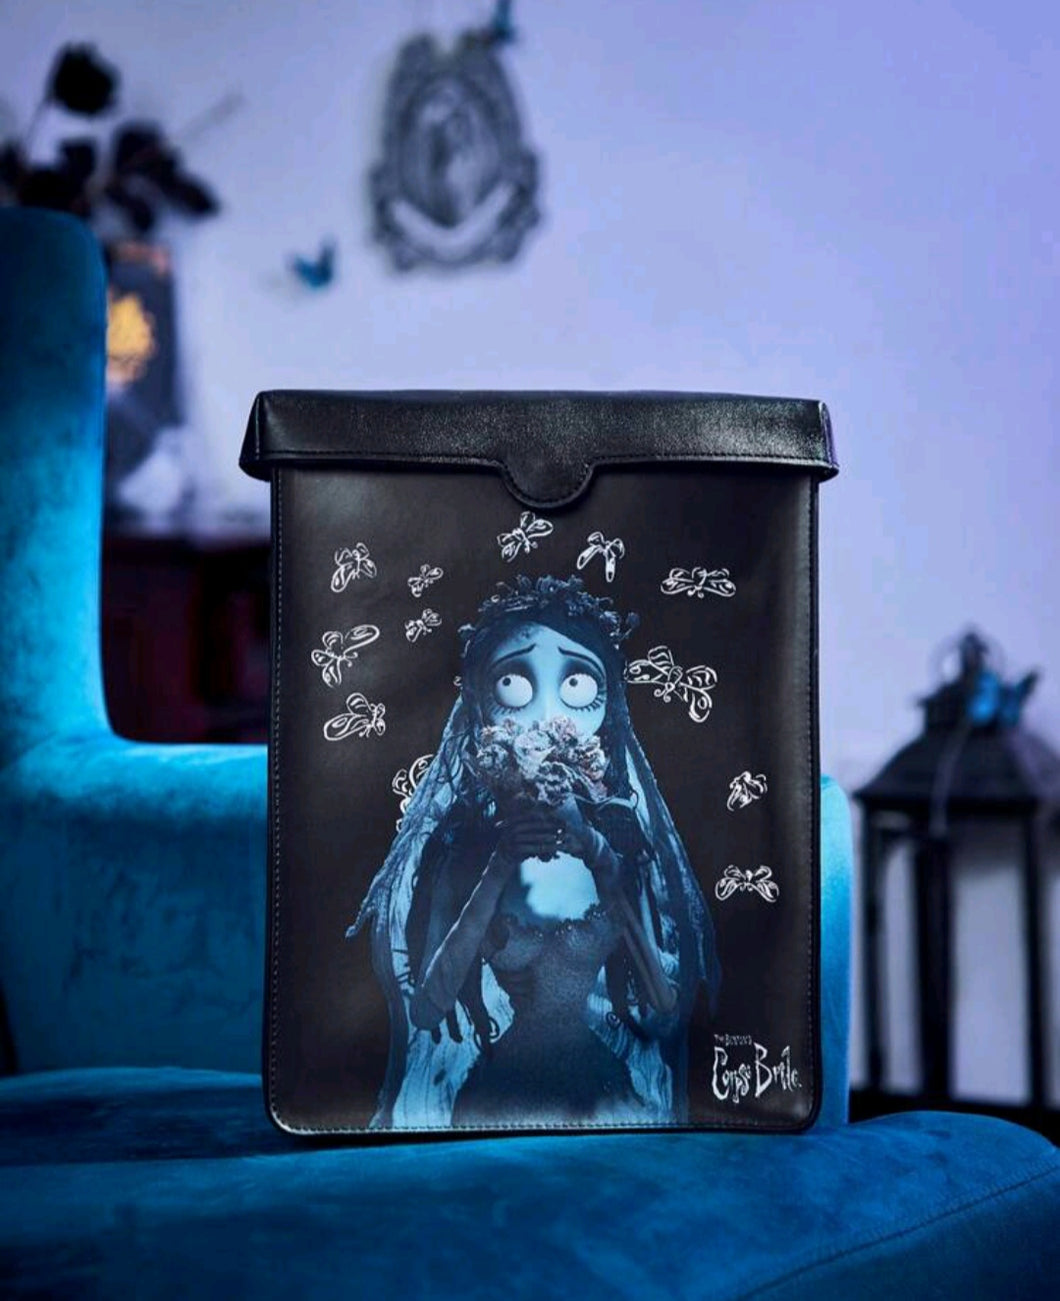 Corpse Bride (FREE CORPSE BRIDE CLUCH WHEN YOU ORDER THIS BAG)